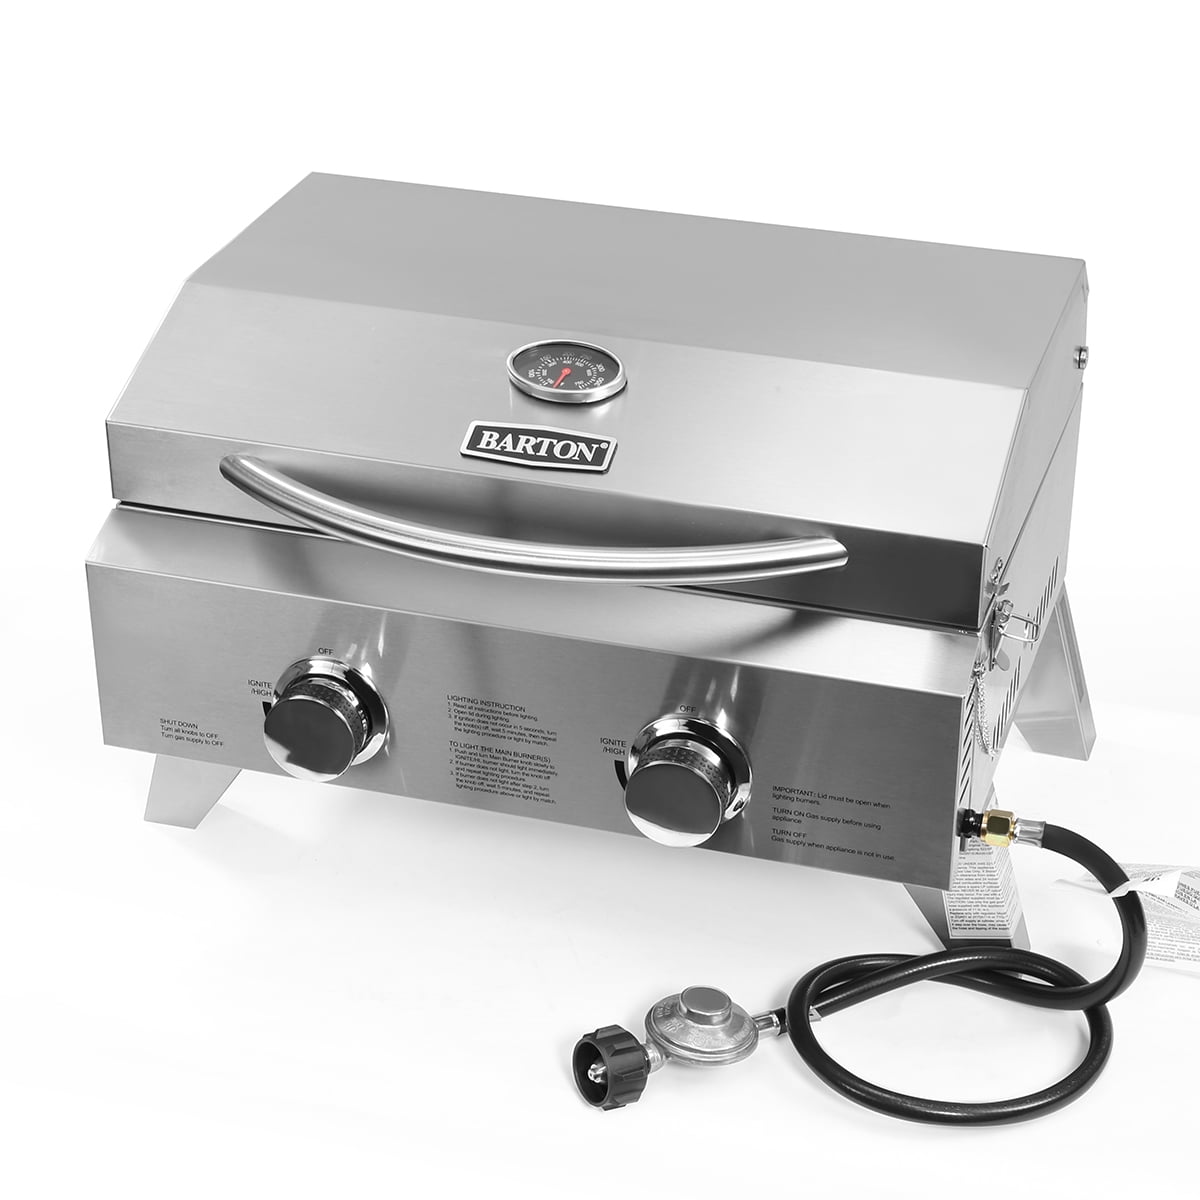 2-Burner Portable Tabletop Propane Gas Grill in Stainless Steel – Skonyon